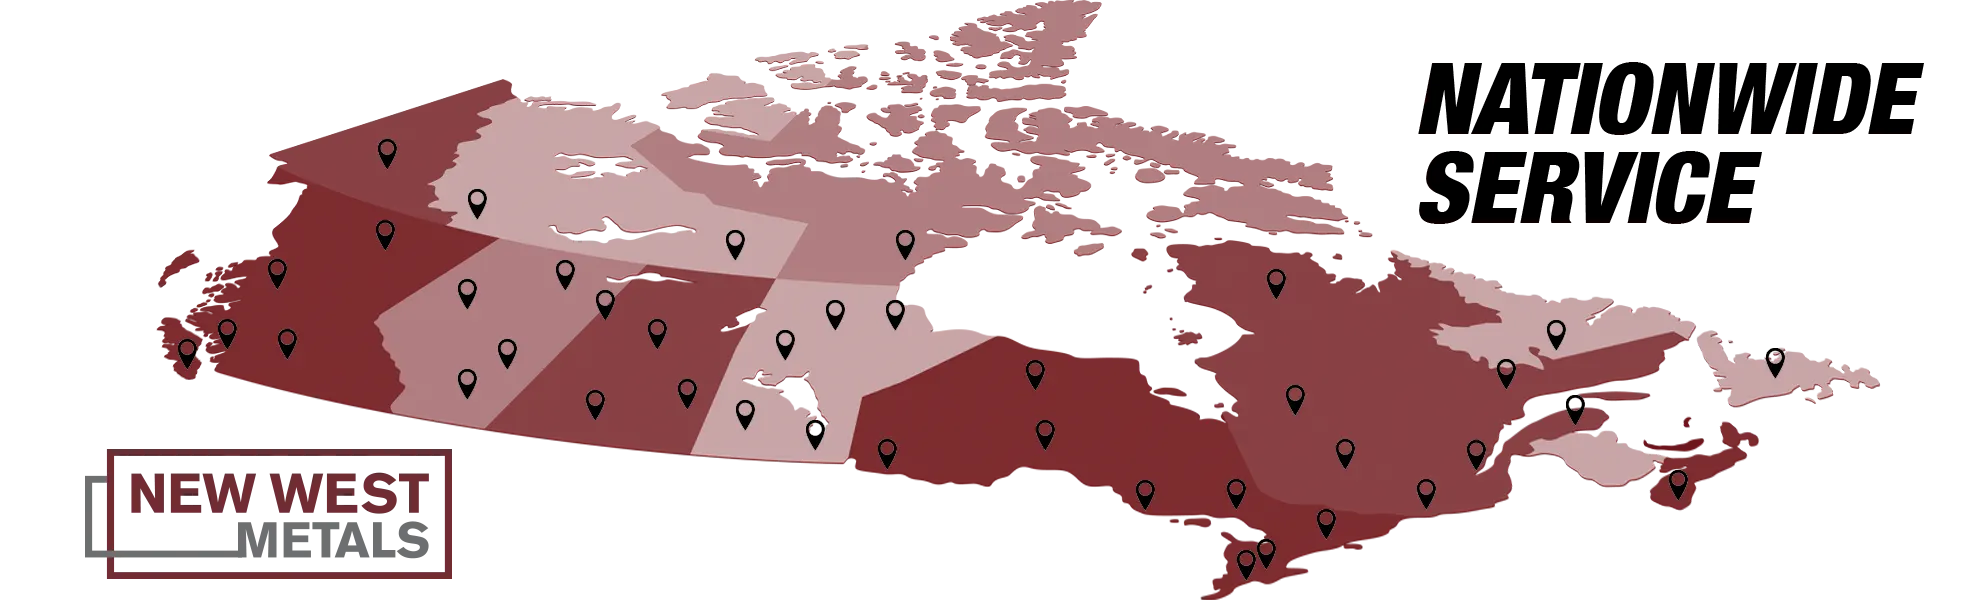 map of canada with location pins